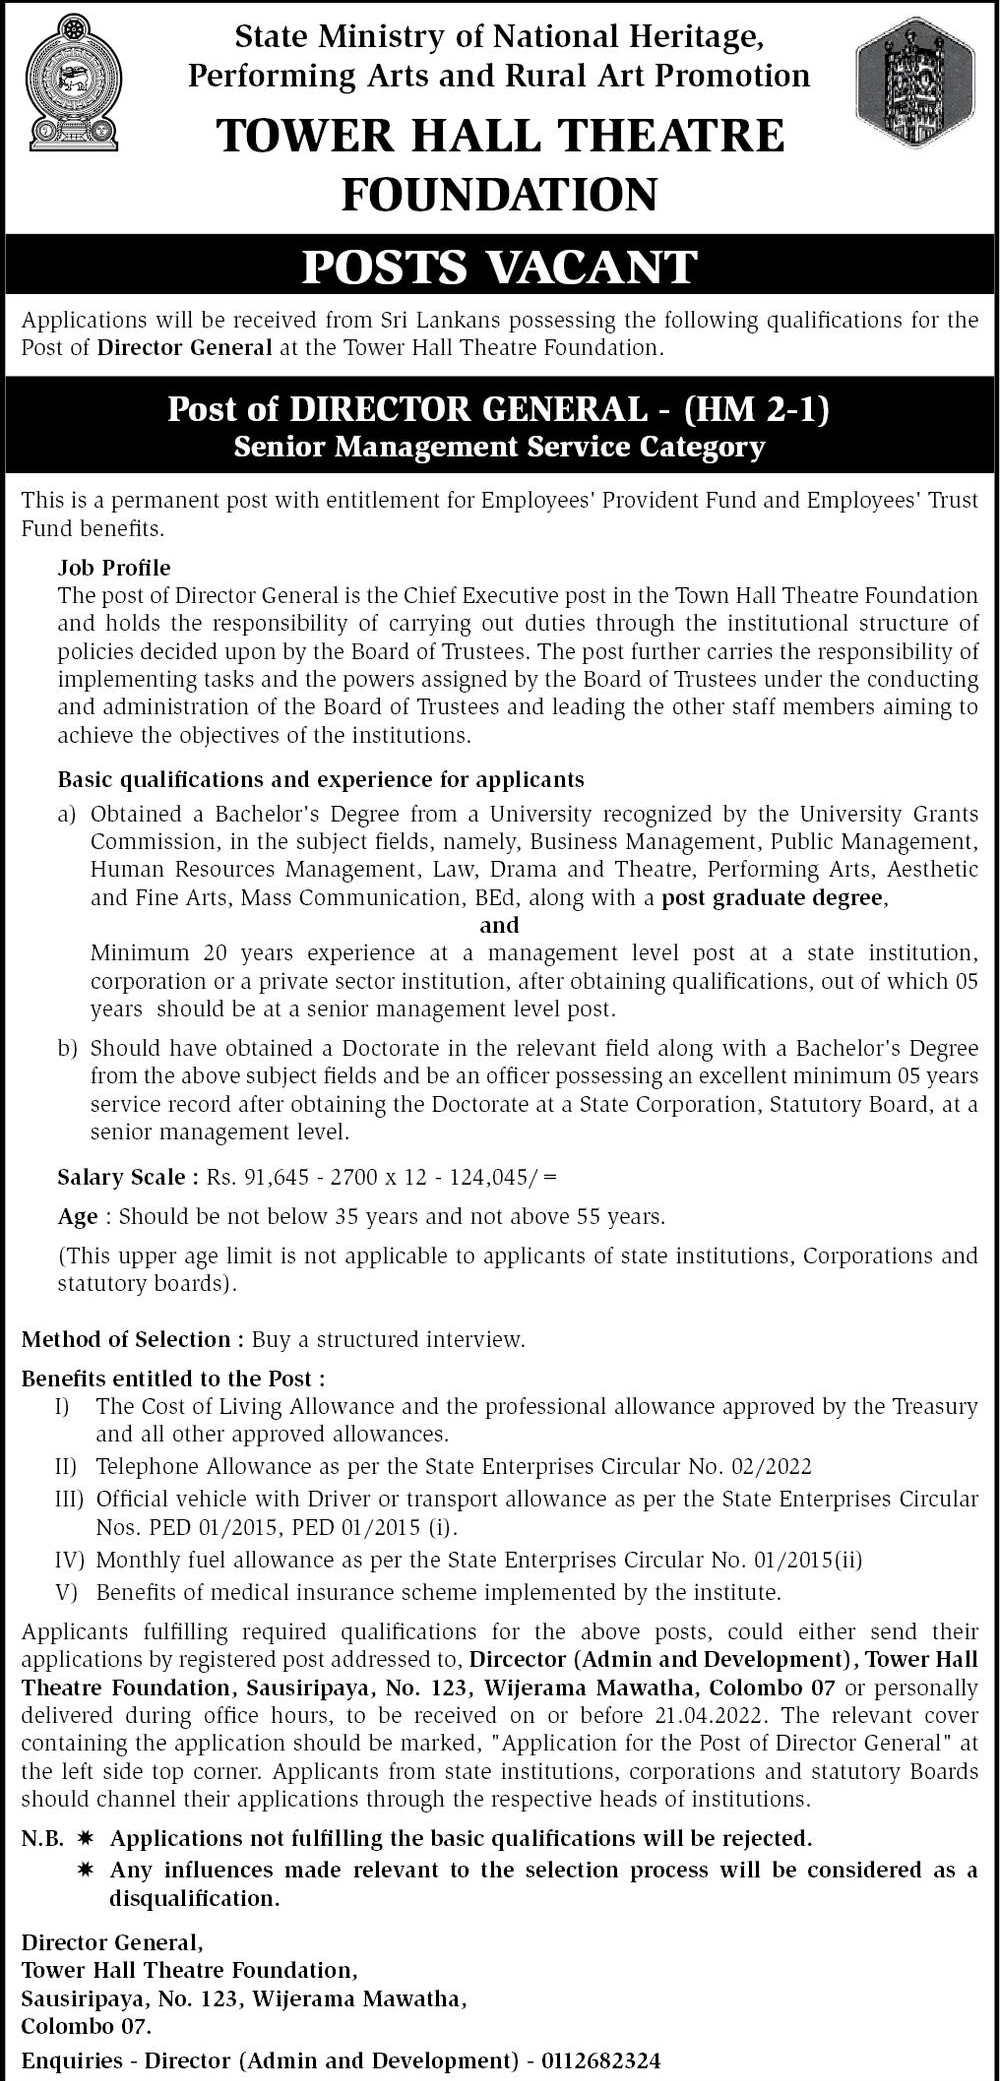 Vacancies in Tower Hall Theatre Foundation